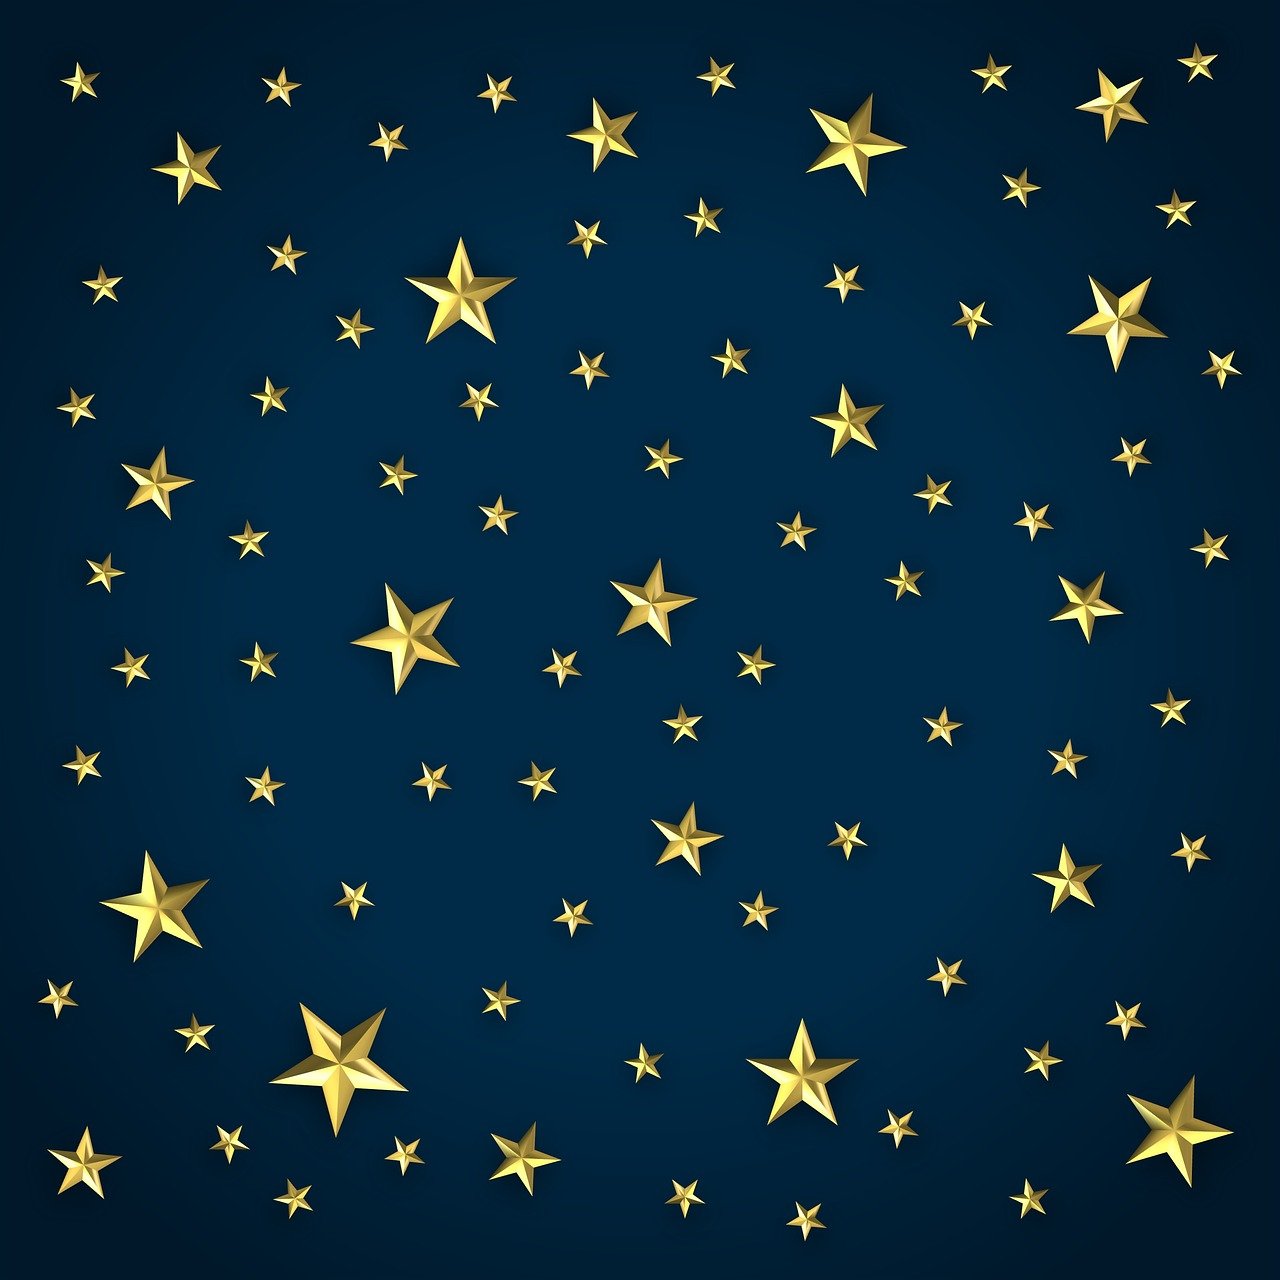 a bunch of gold stars on a blue background, an illustration of, art deco, high quality illustration, midnight, higher detailed illustration, christmas